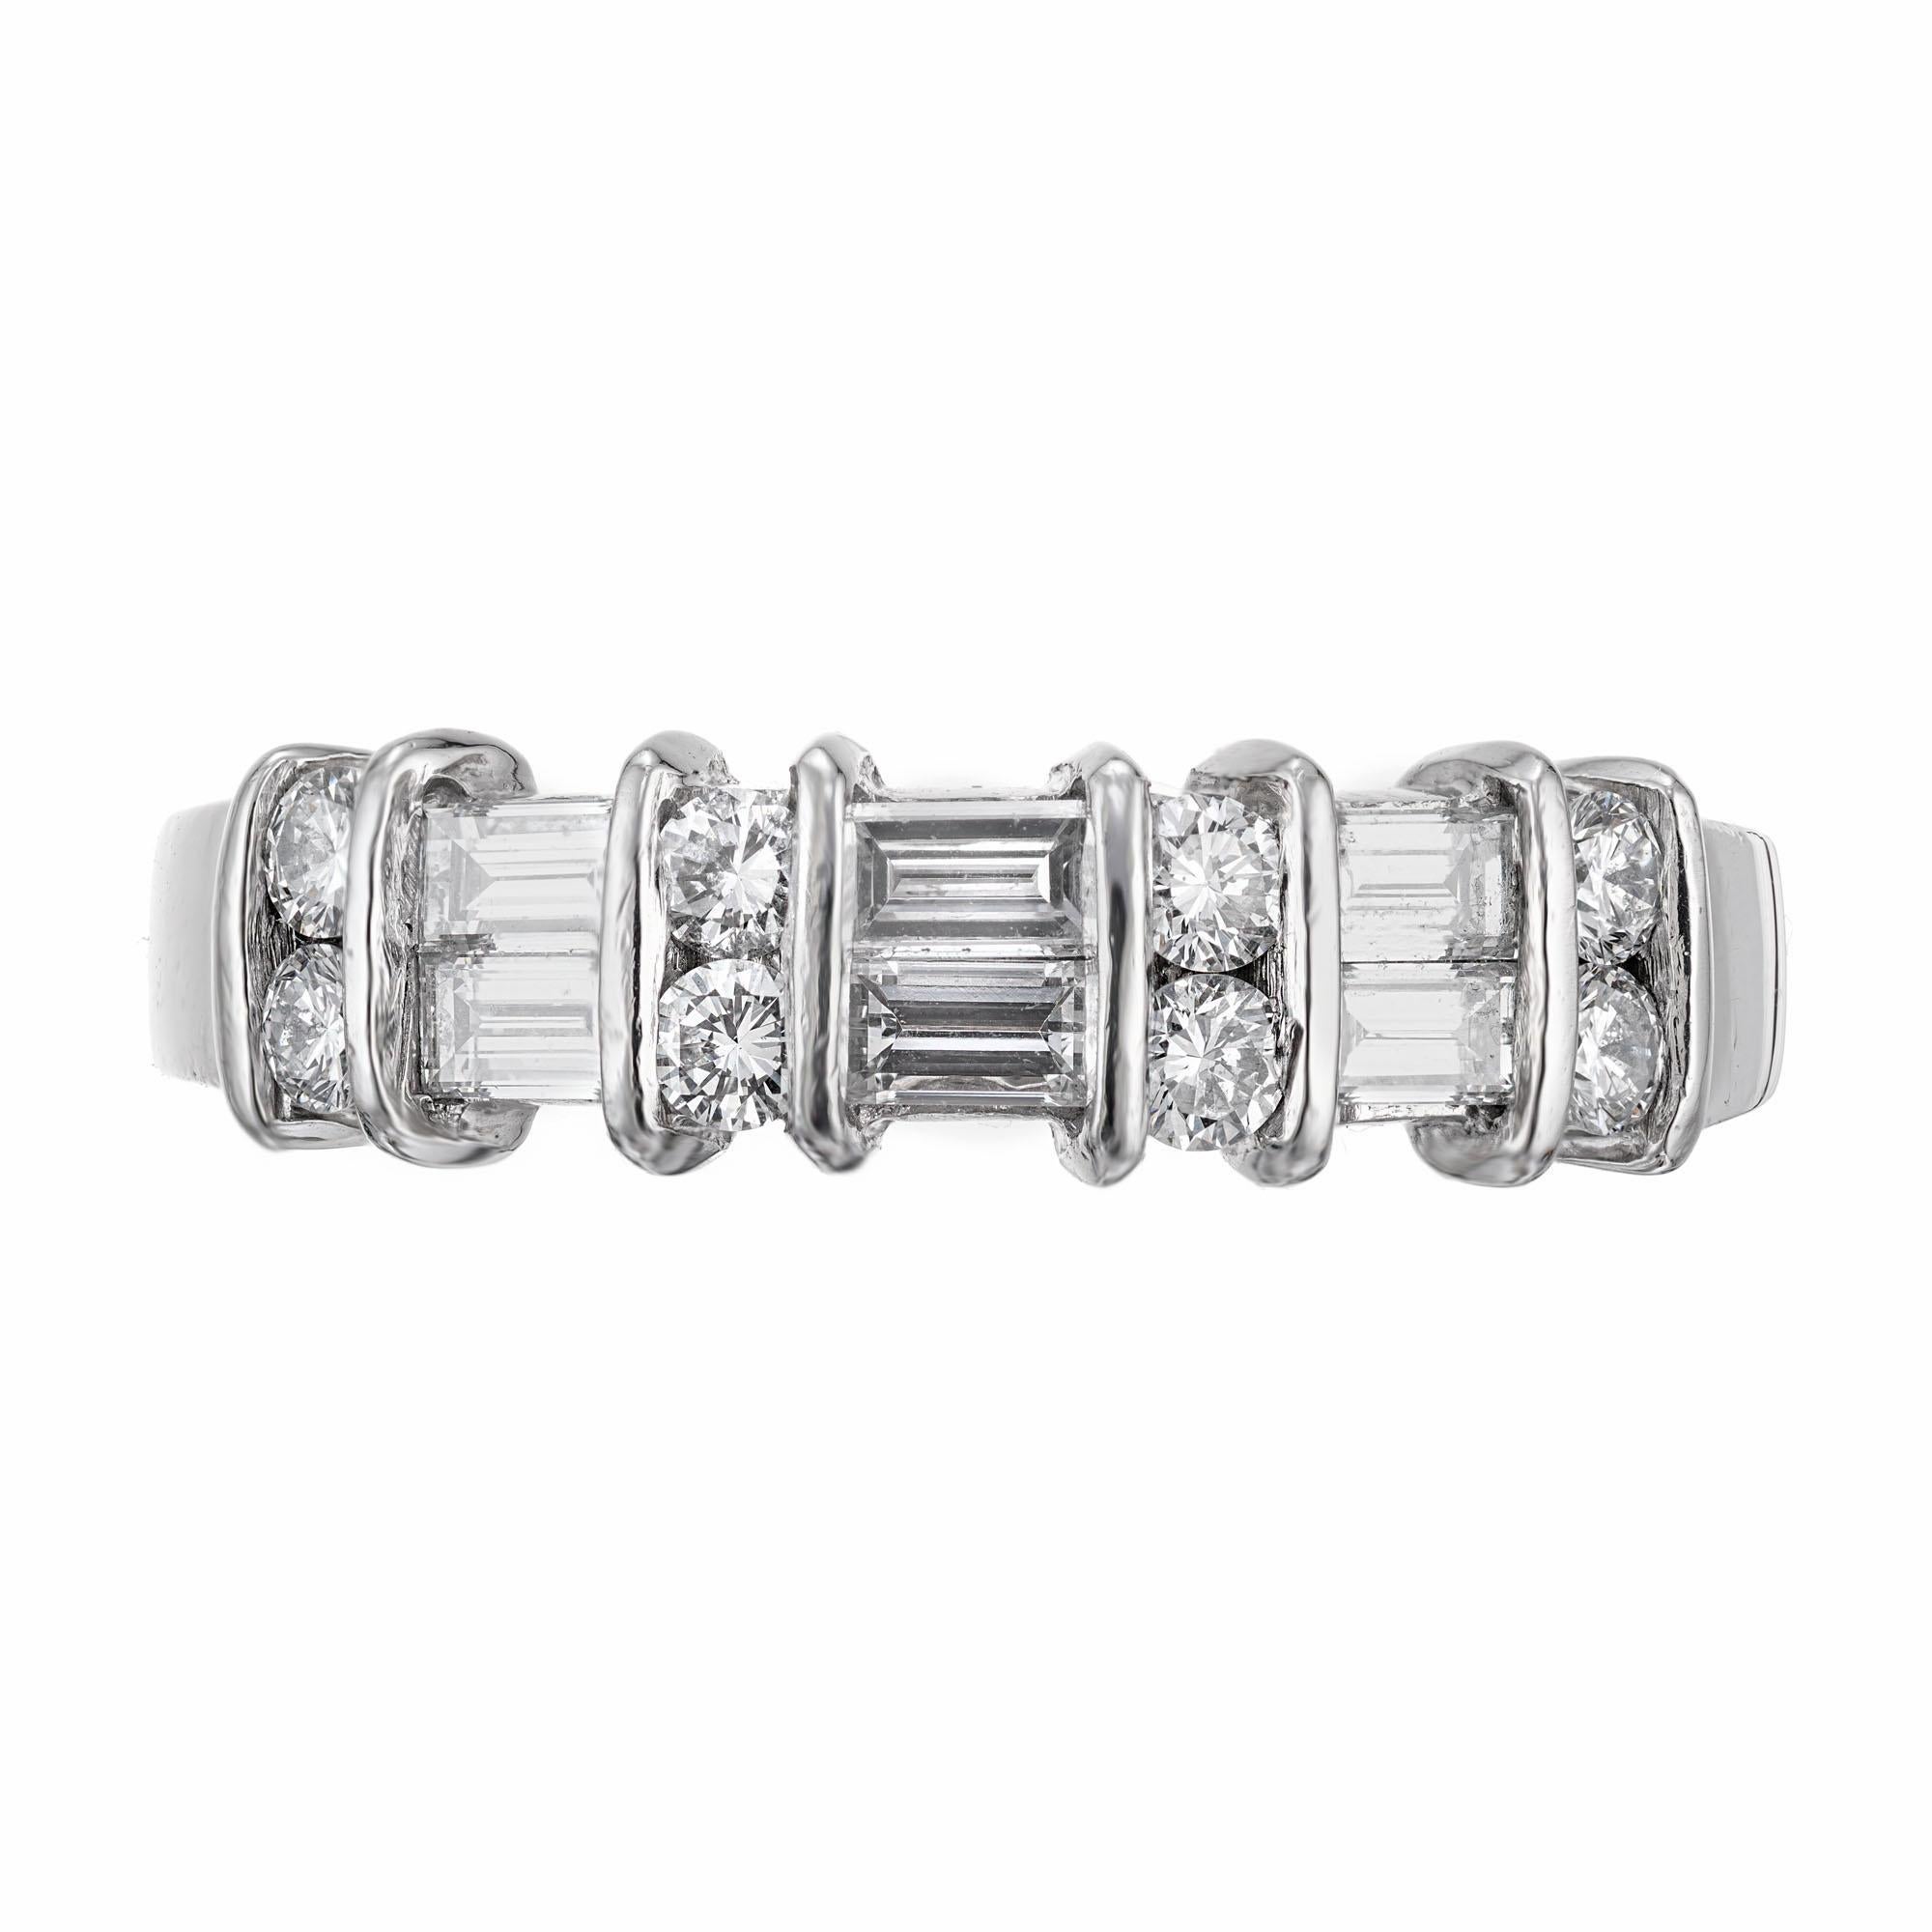 Diamond wedding band ring. 8 round ideal cut diamonds alternating with 6 baguette cut diamonds in a platinum setting.  

8 round Ideal cut diamonds, approx. total weight .25cts, F, VS
6 baguette diamonds, approx. total weight .30cts, F, VS, 3.14 x